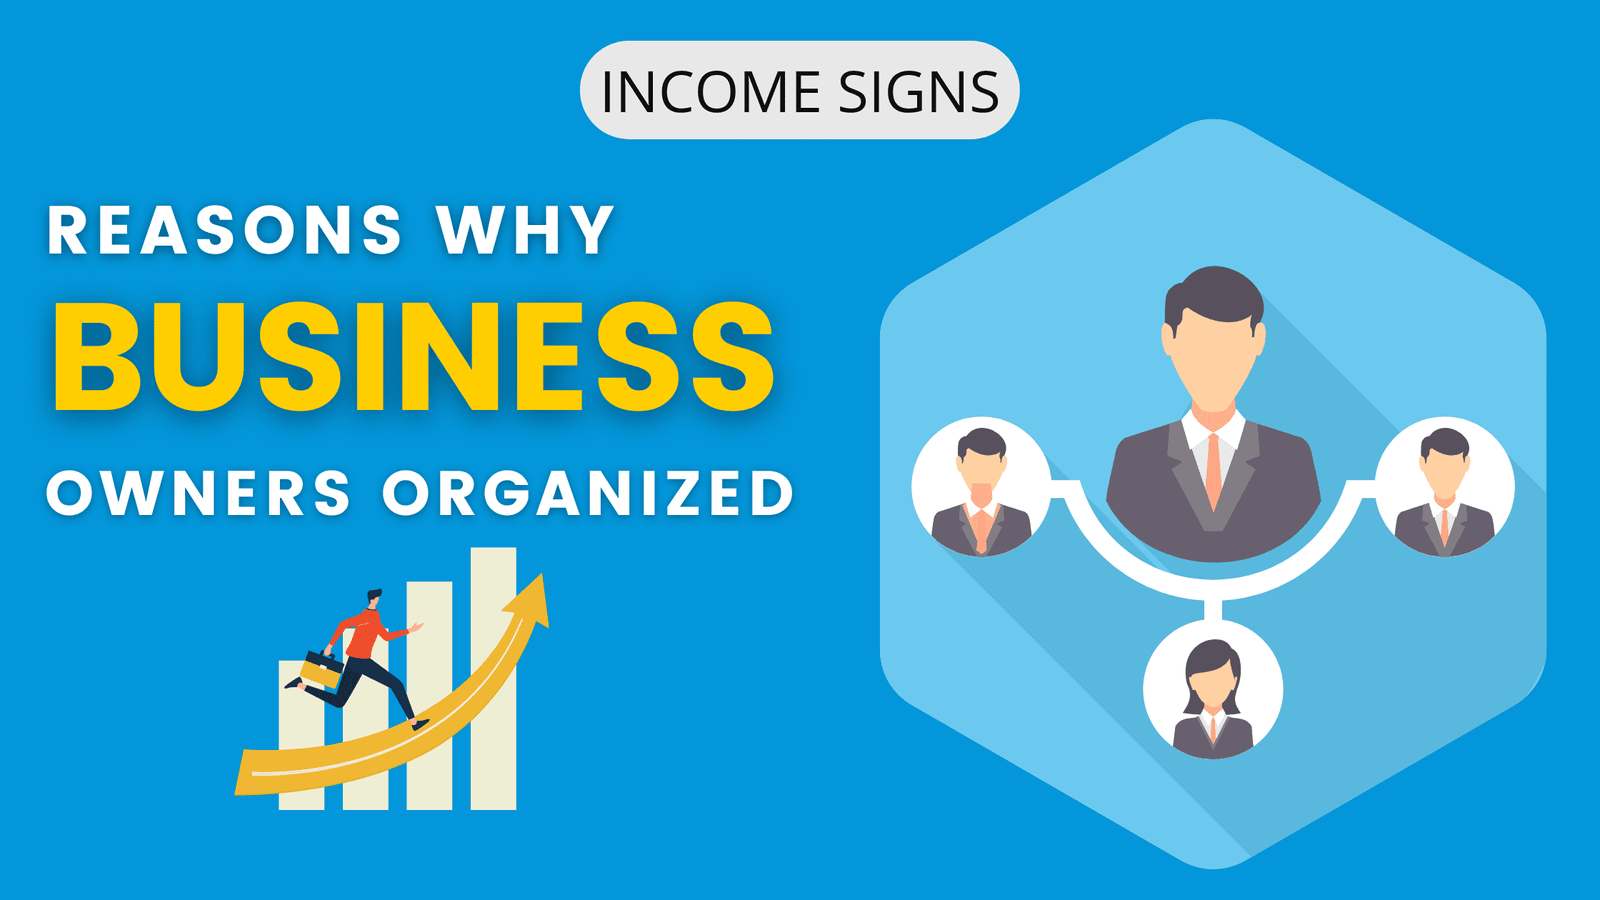 Reasons Why Being Organized Is Important for Business Owners (1)